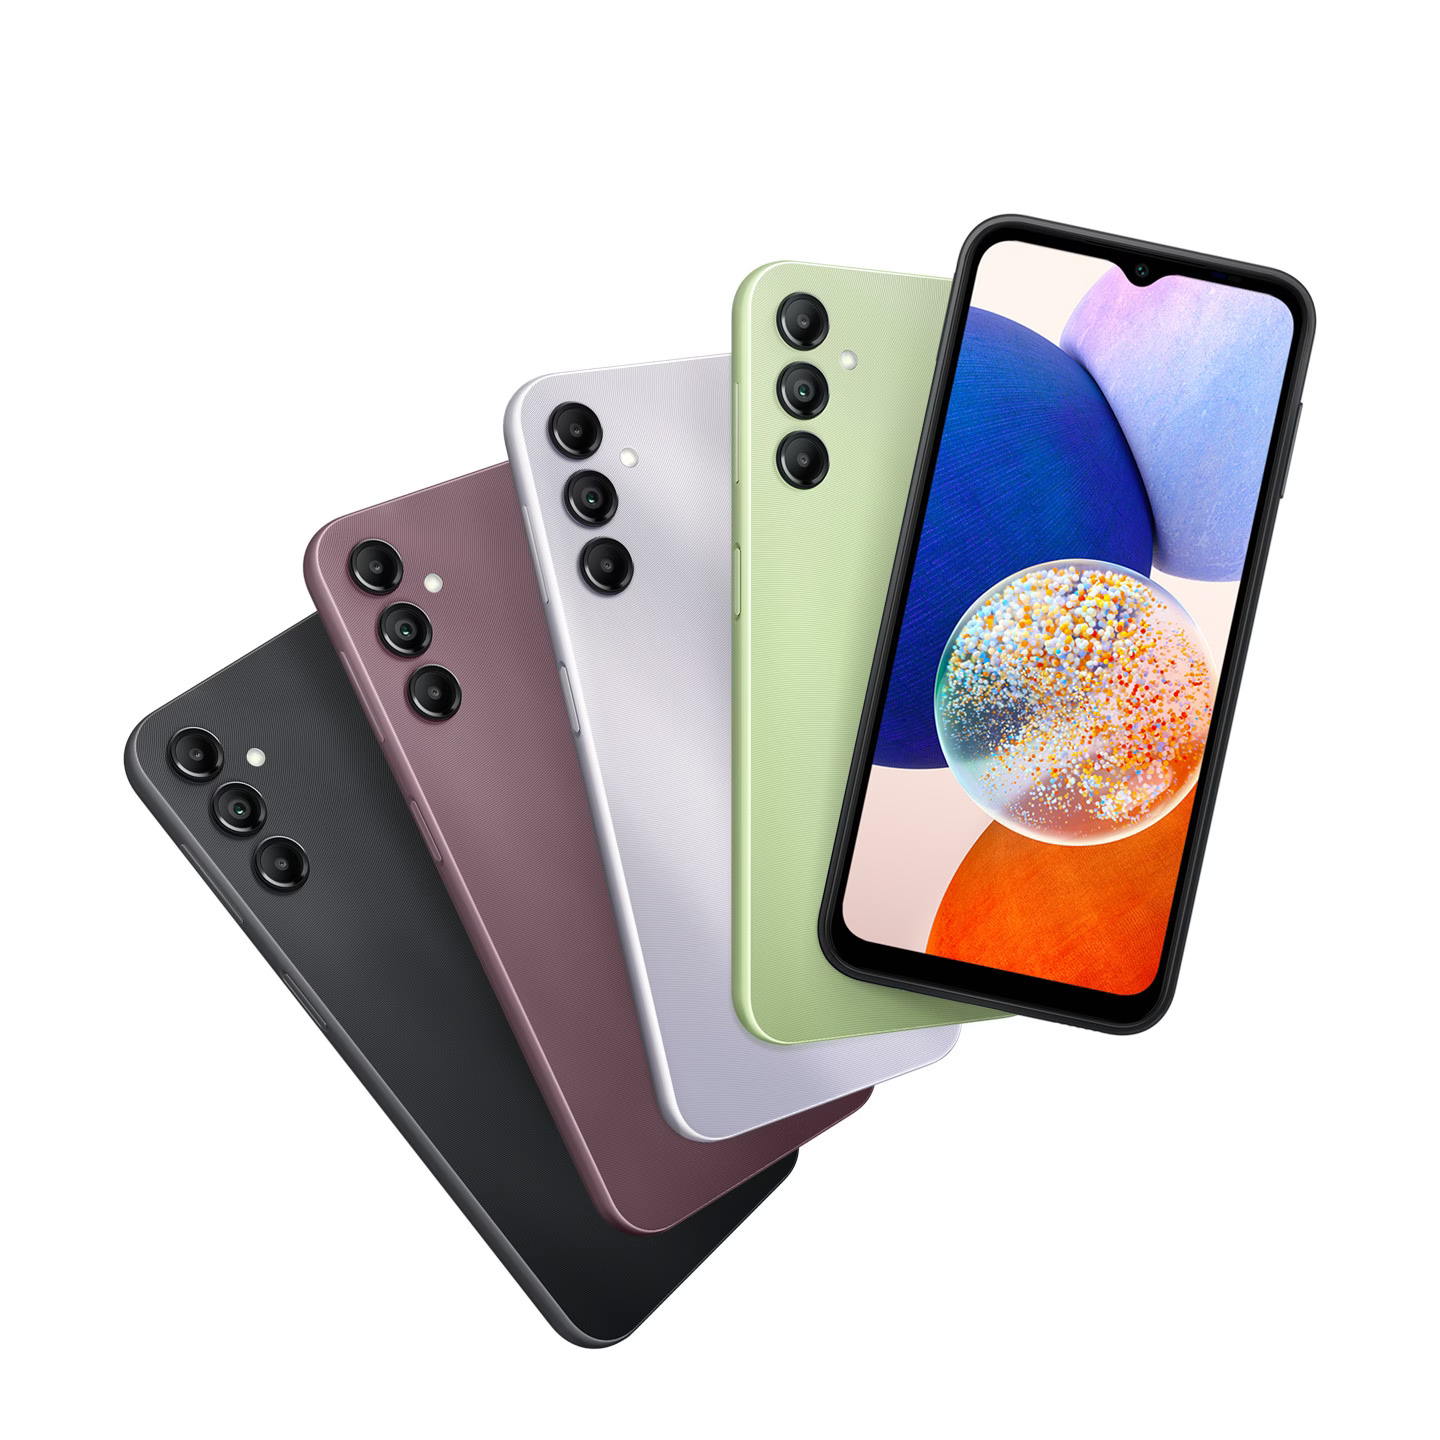 What are the Best Phones Under ₱15,000 in the Philippines this 2023?